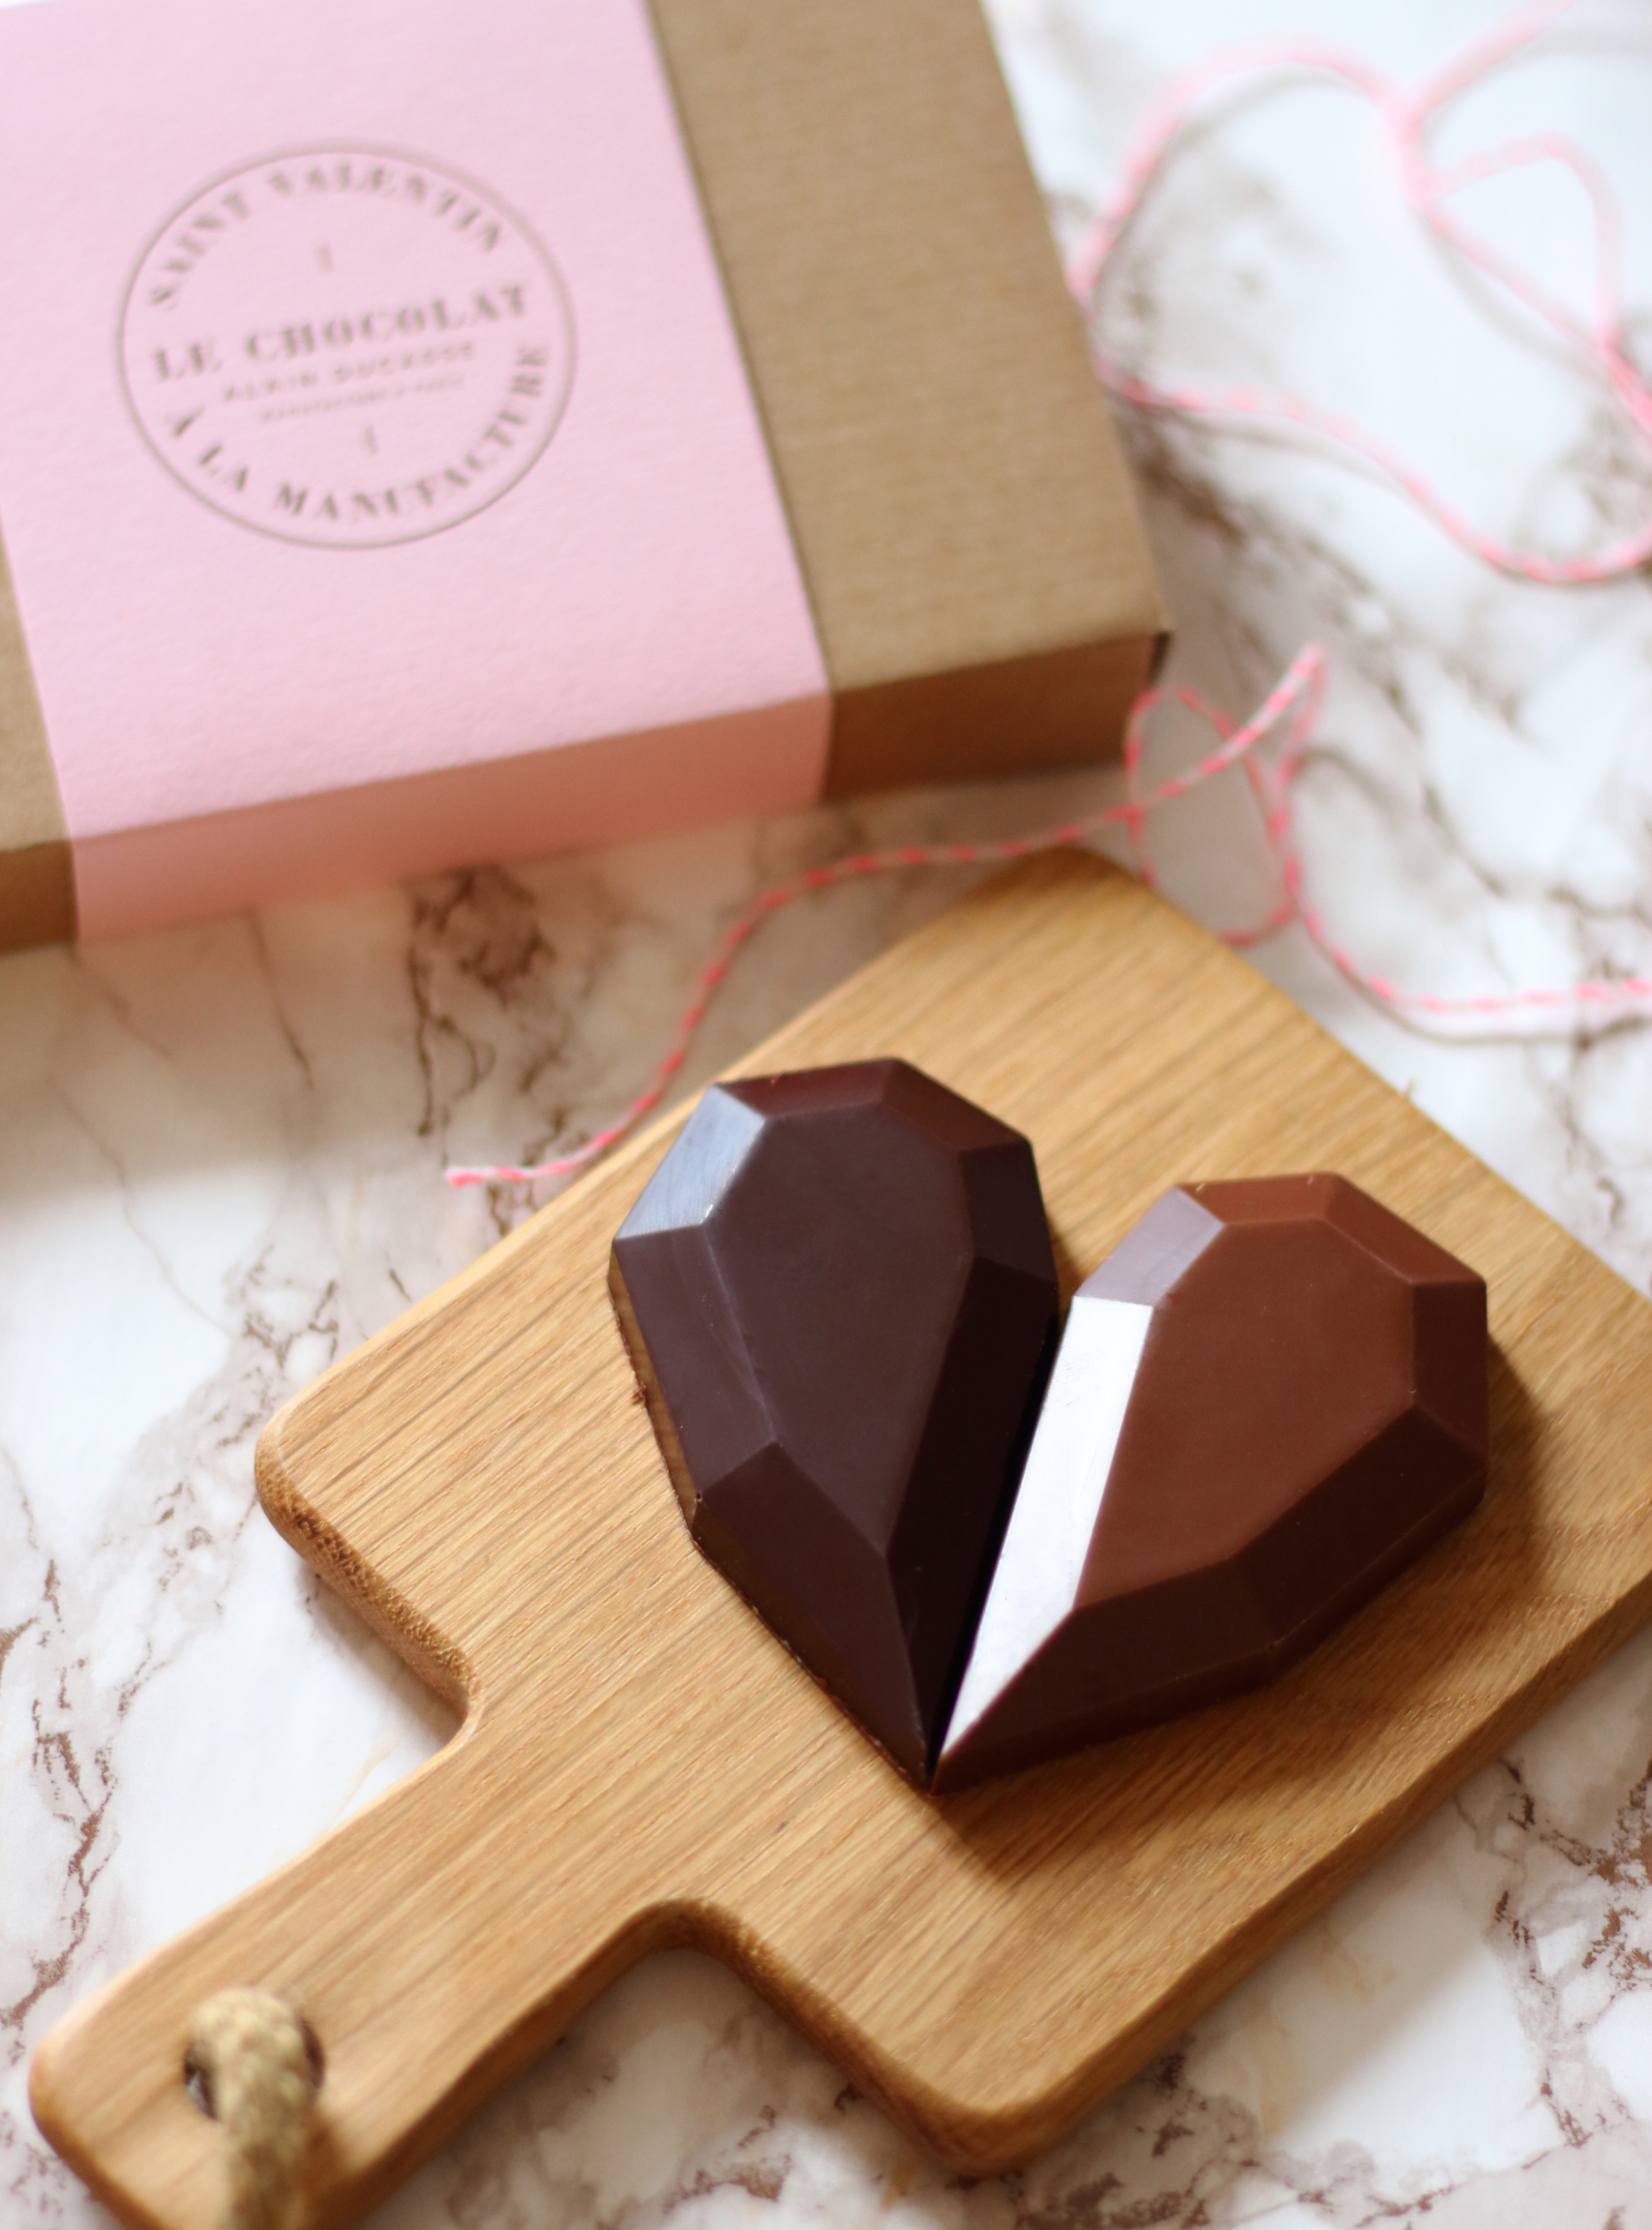 A heart to share by Le Chocolat Alain Ducasse